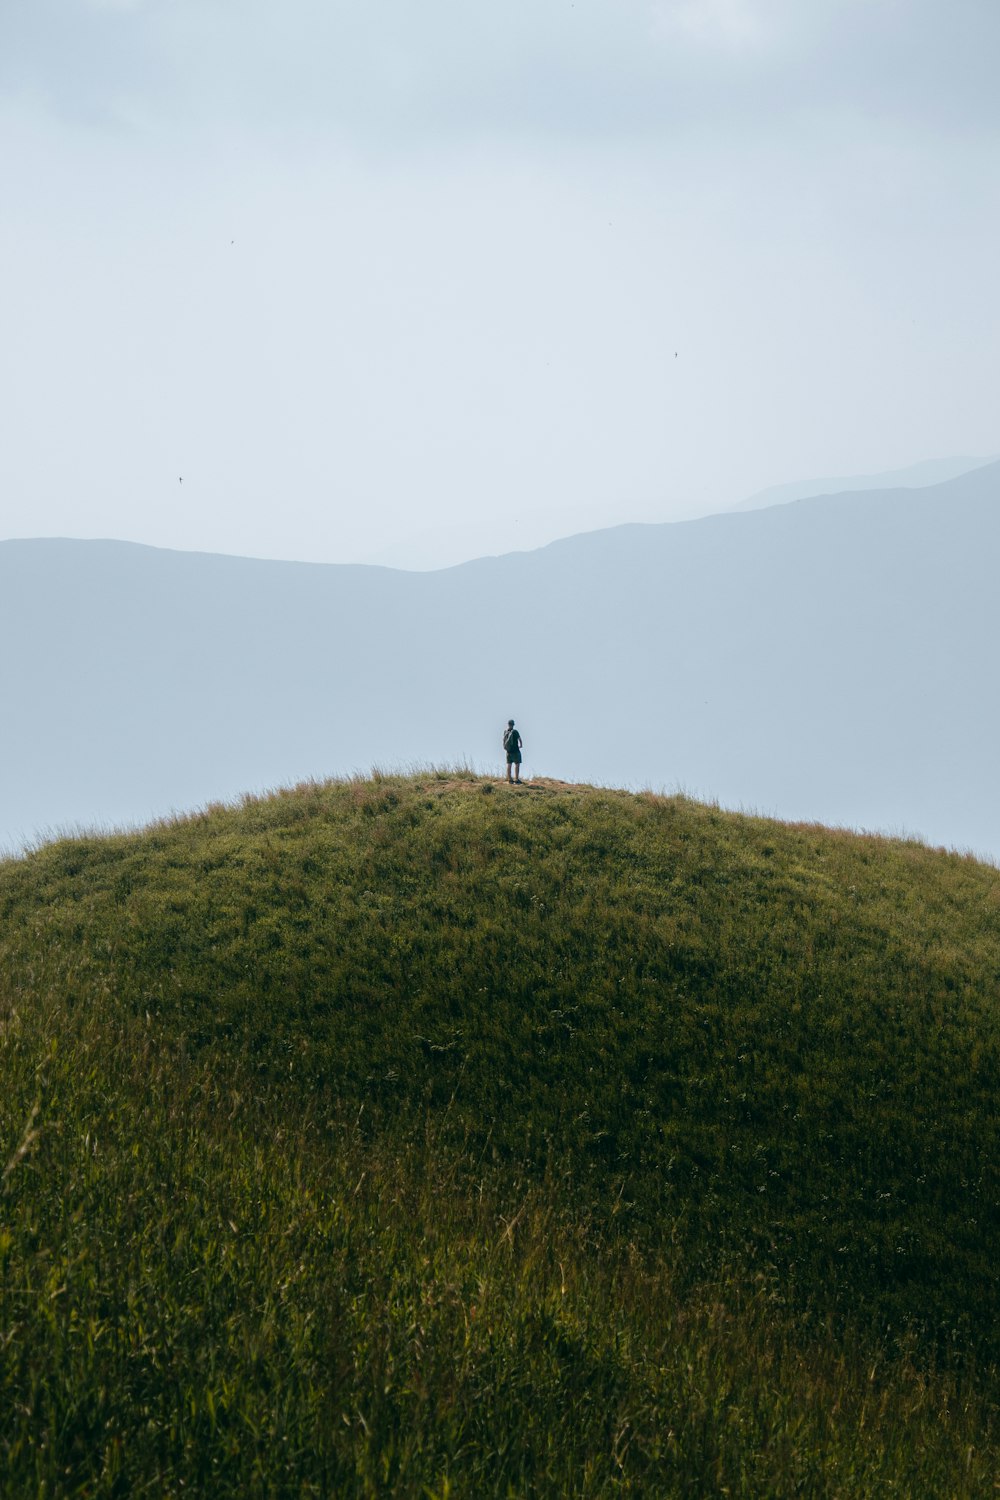 a lone person standing on top of a grassy hill